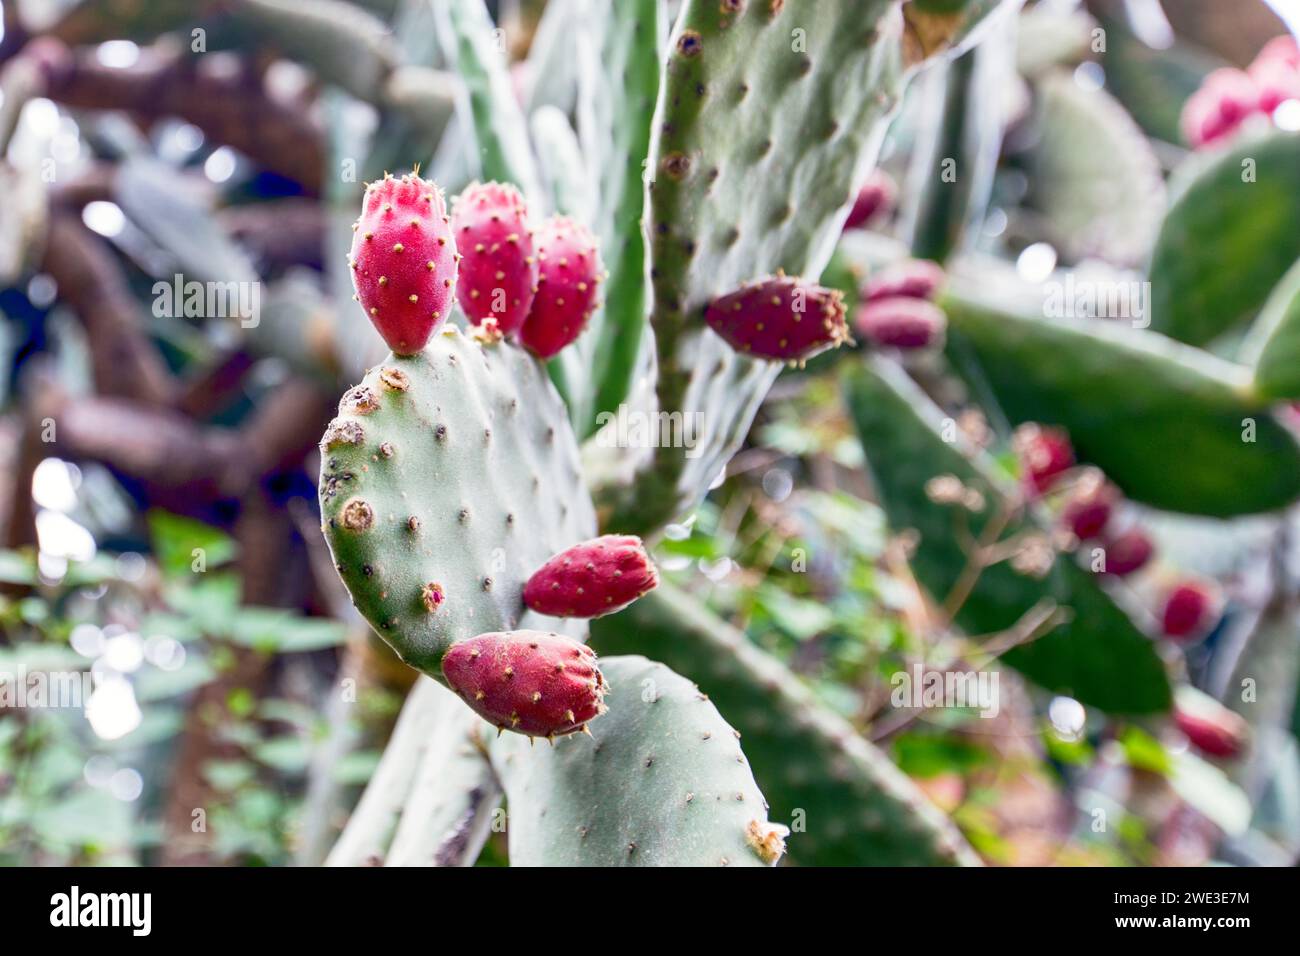 Close-up of cactus growing on plant (La Palma, Canaries, Spain) Stock Photo